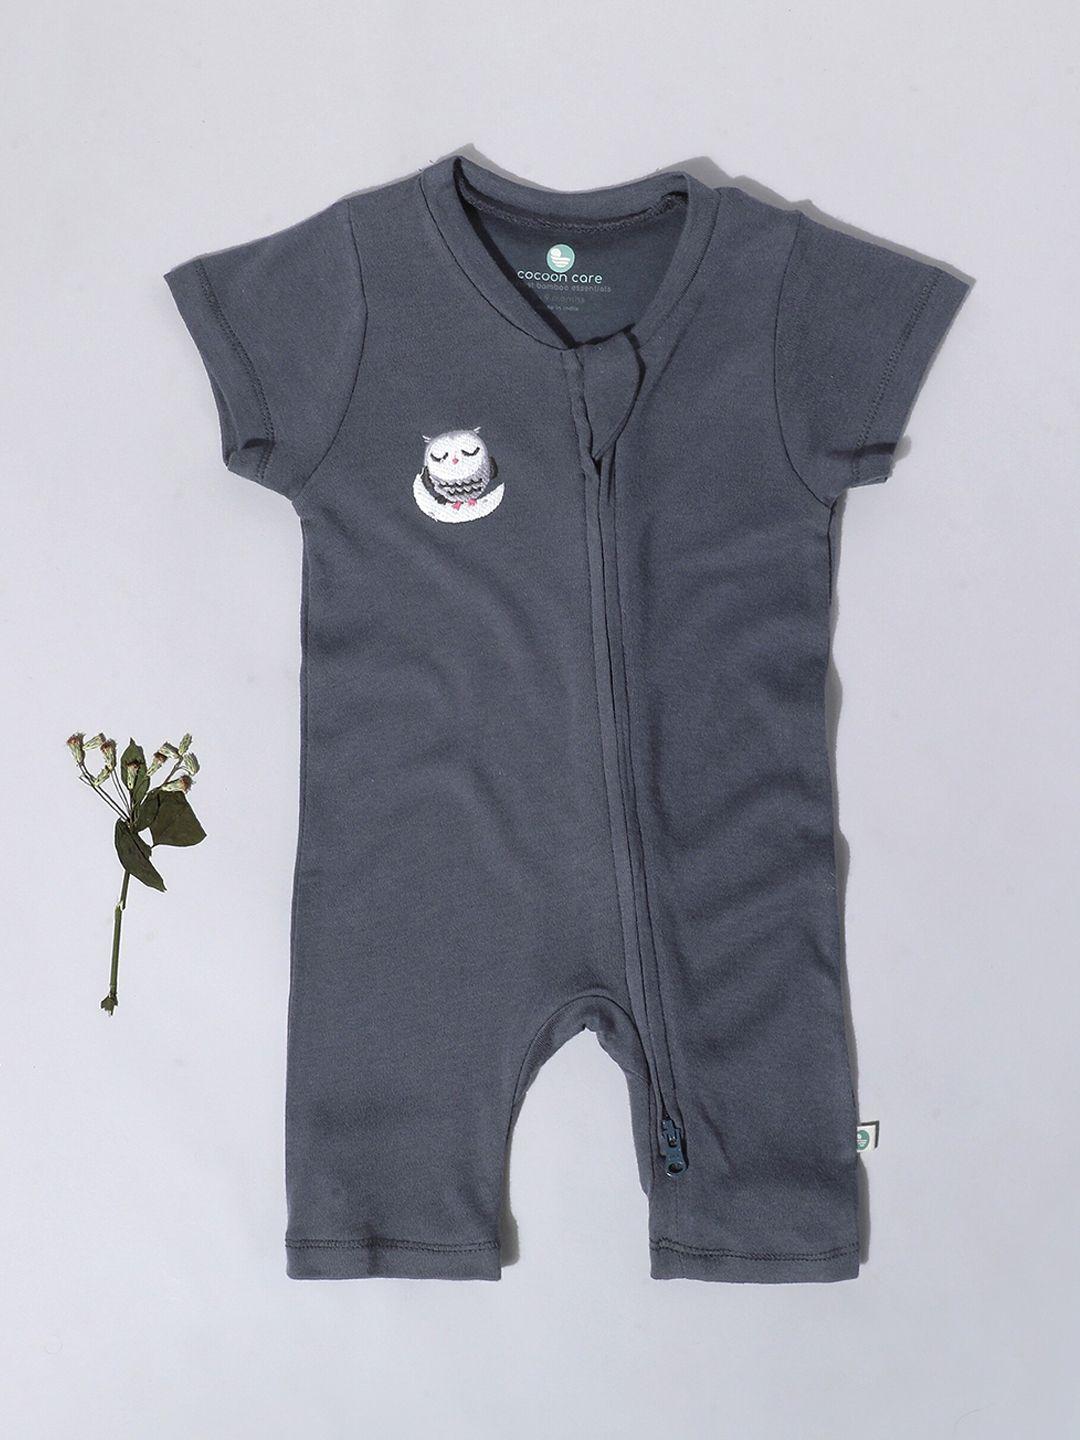 cocoon-care-infant-kids-navy-blue-solid-rompers